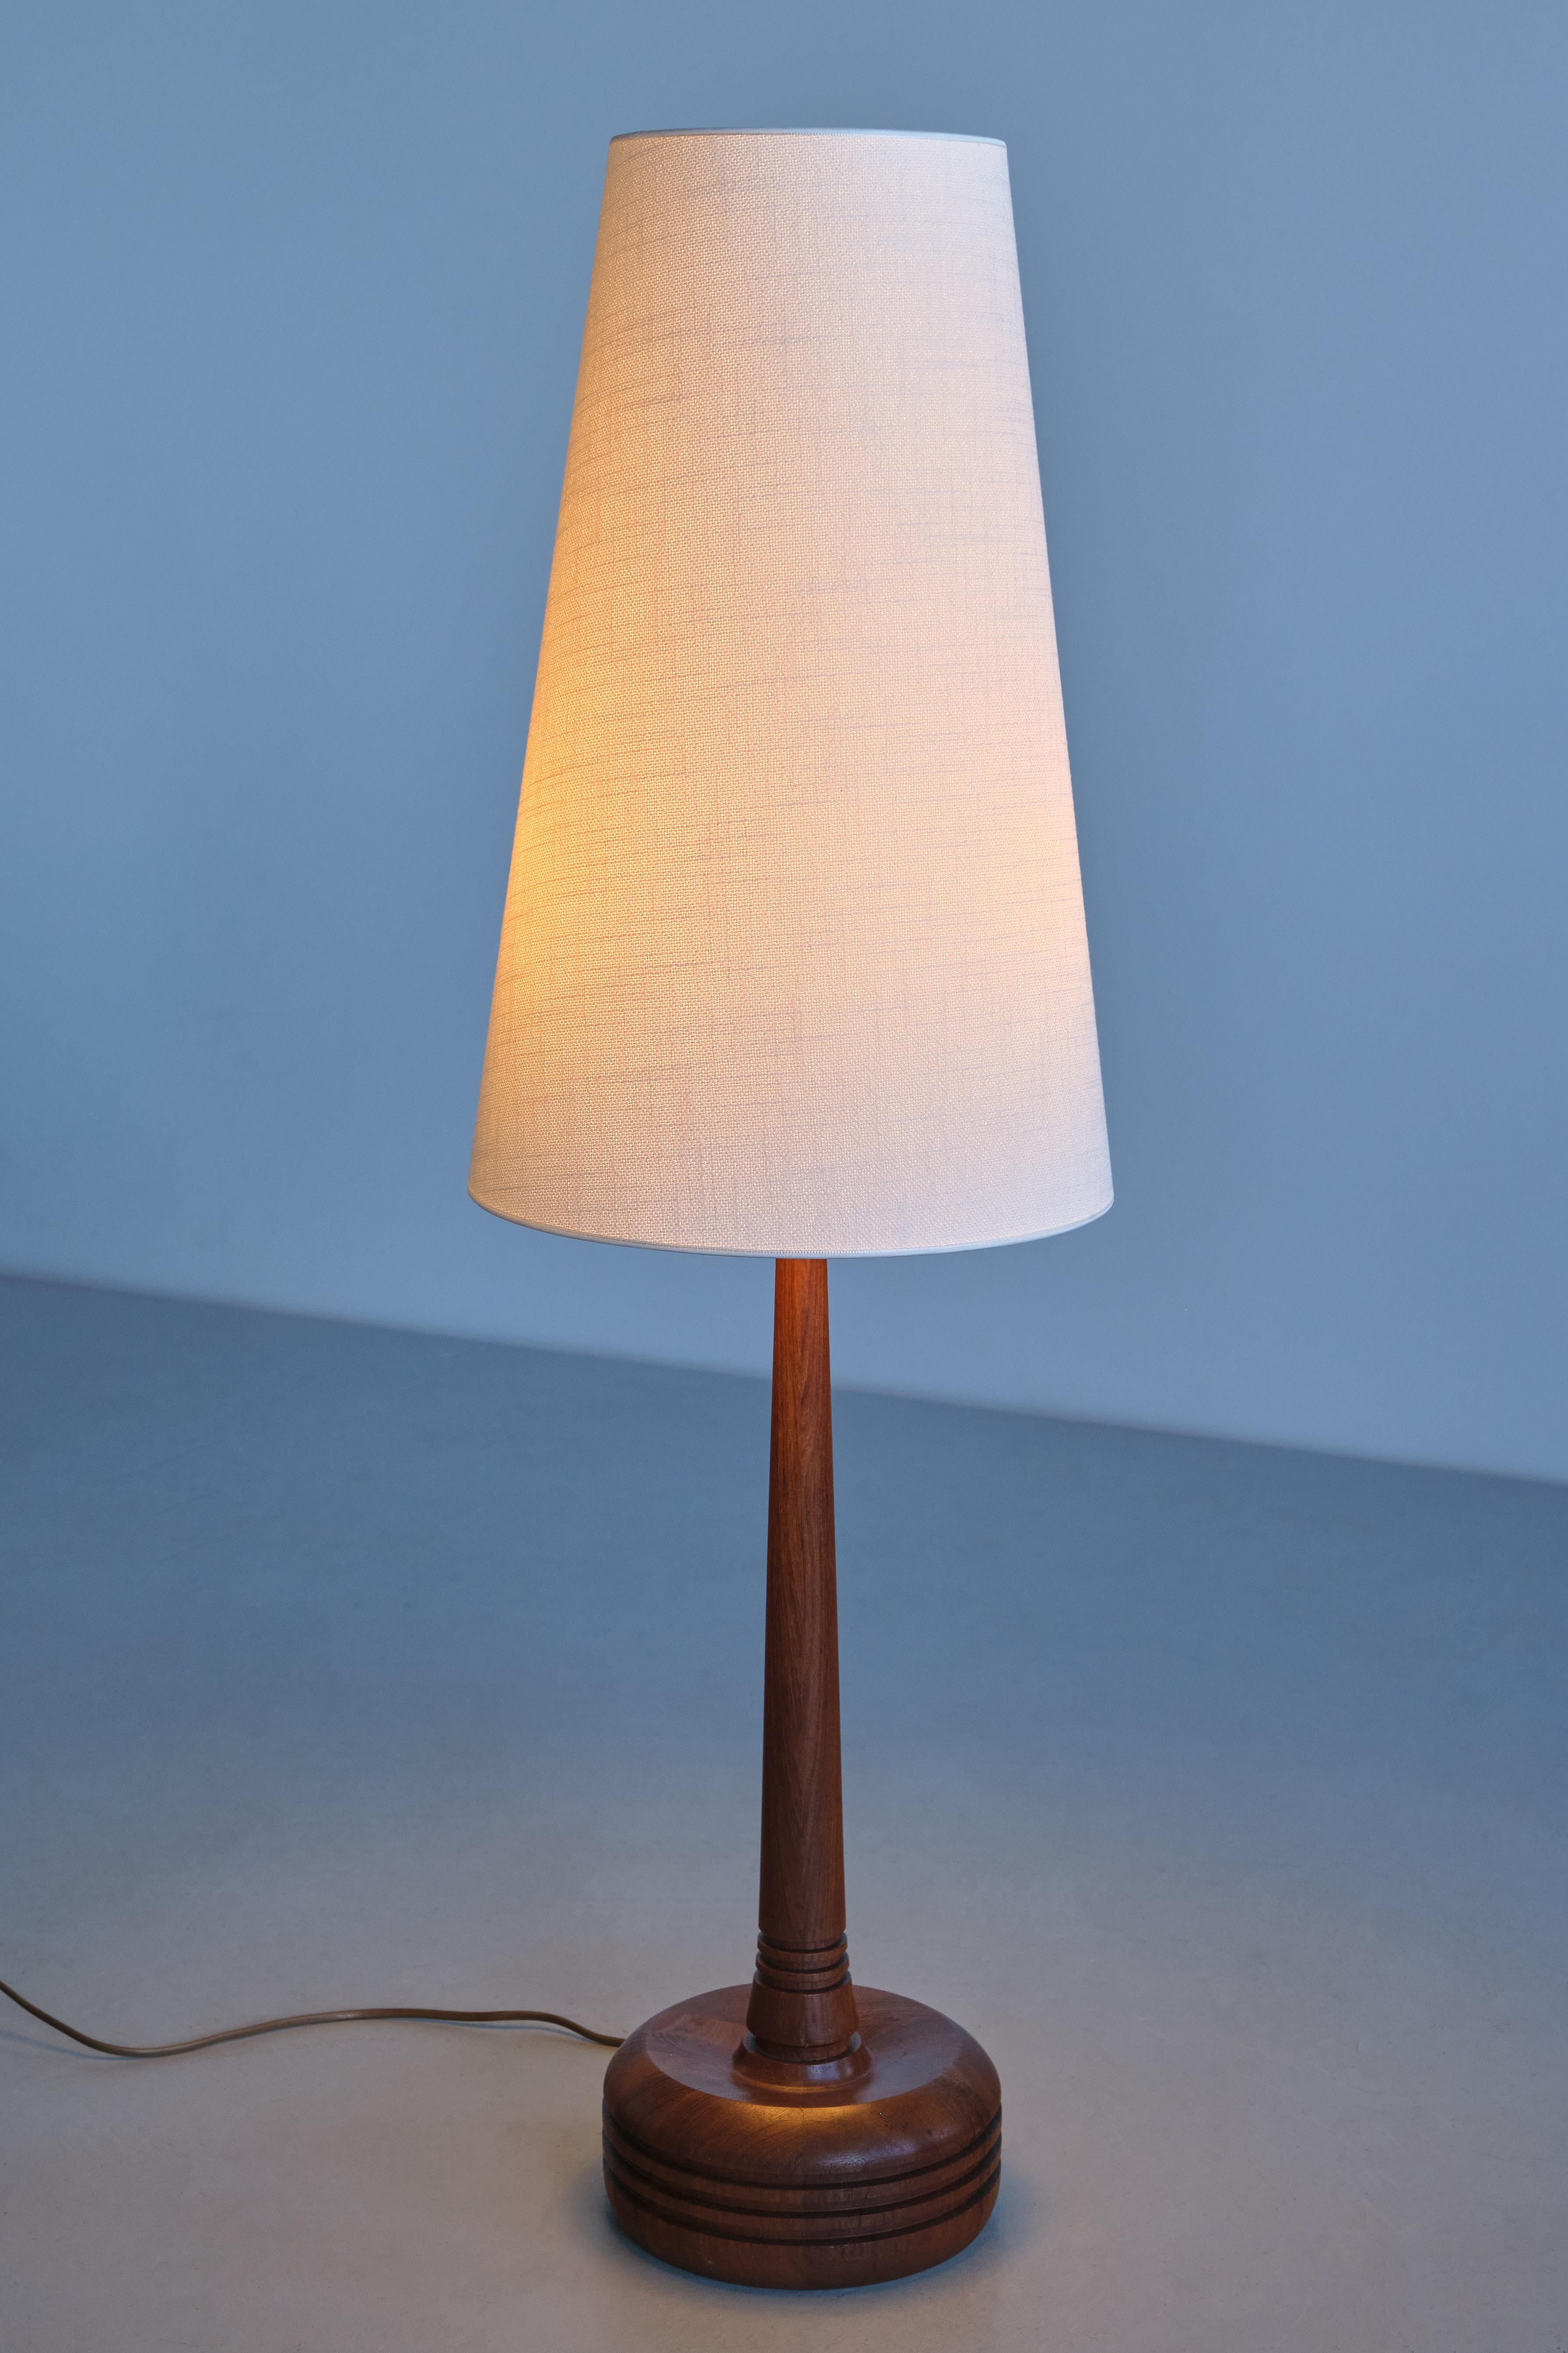 Swedish Tall Stilarmatur Tranås Table Lamp in Teak Wood with Cone Shade, Sweden, 1960s For Sale